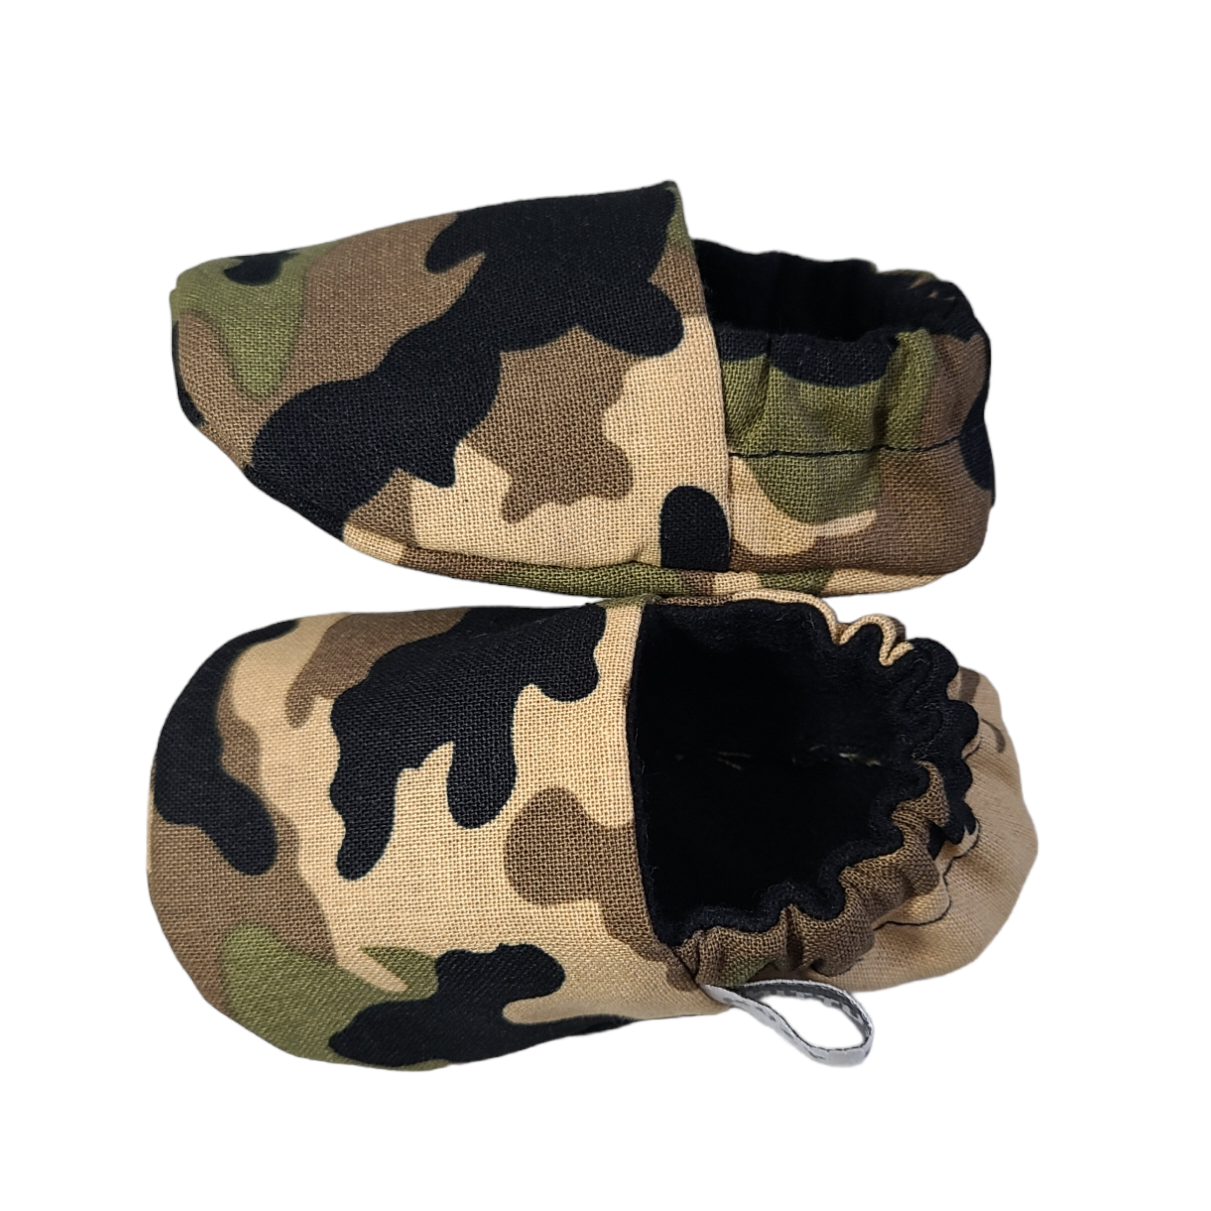 Army Baby Booties, Green Camo Baby Slippers, Camo Baby Crib Shoes, Army Baby Moccs, Army Camo Green Slippers, Camo Booties